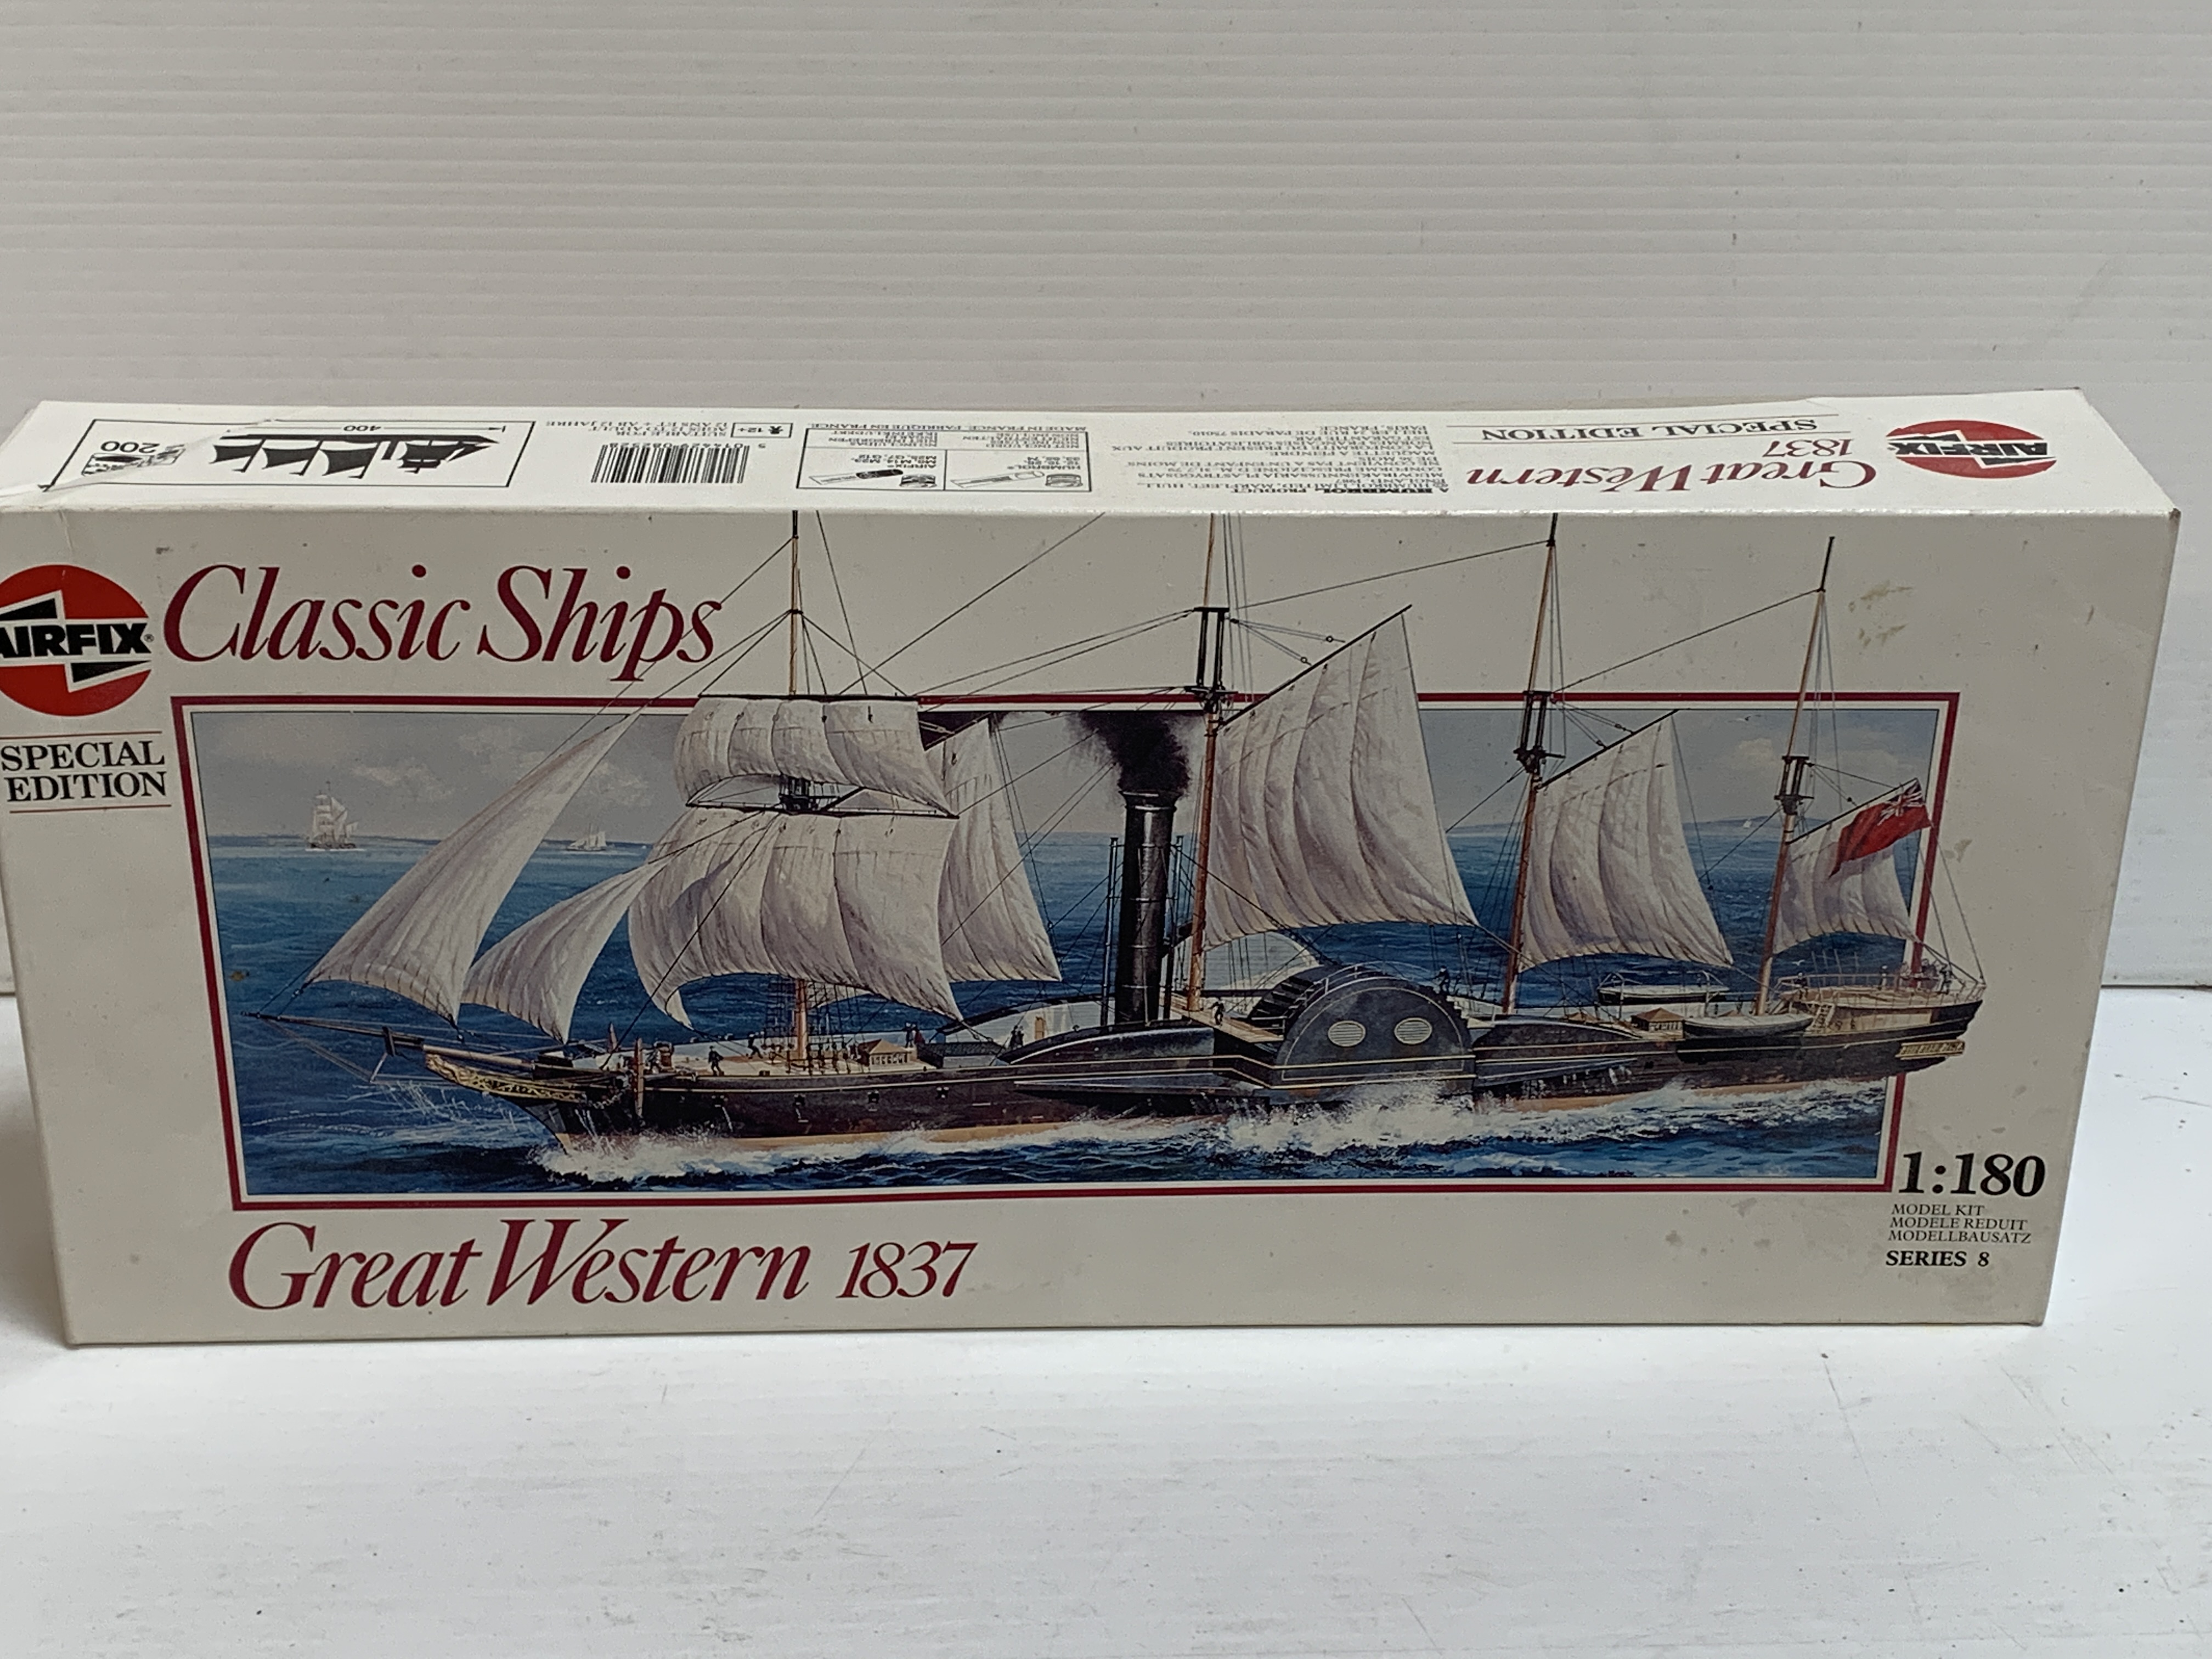 Airfix Classic Ships 'Great Western' 1837 - Image 2 of 2